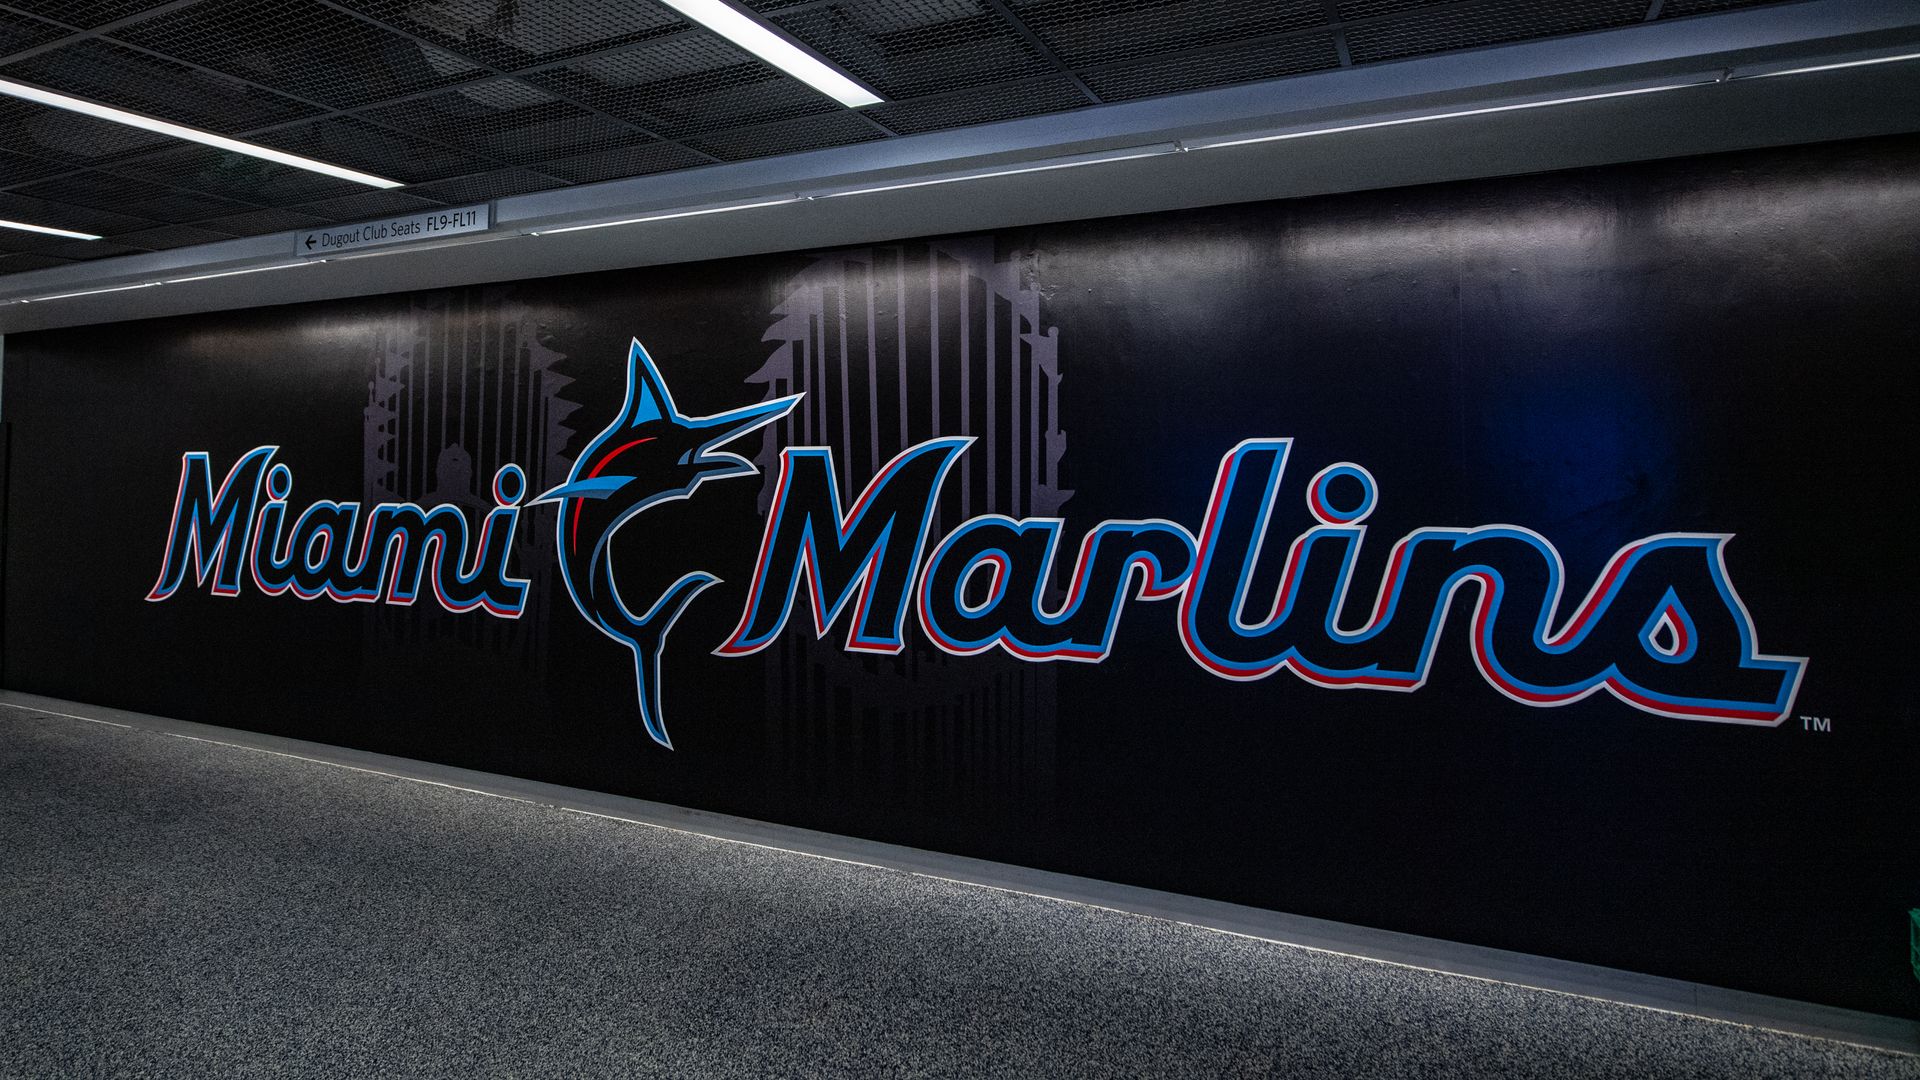 Miami Marlins: 2020 season on pause after COVID-19 outbreak among team